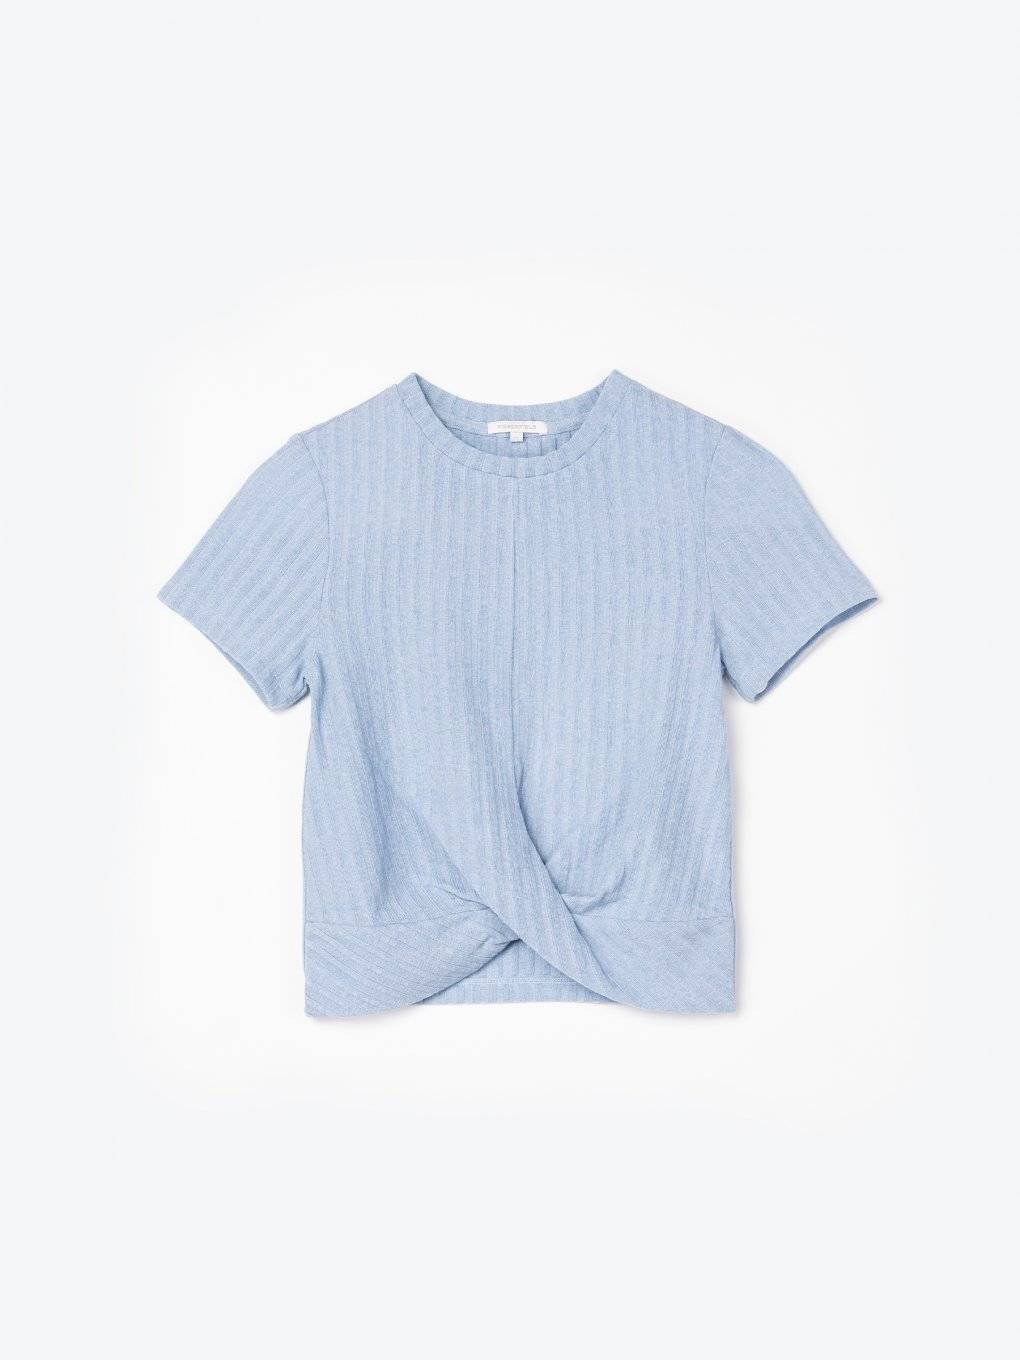 Ribbed short sleeve crop top with knot